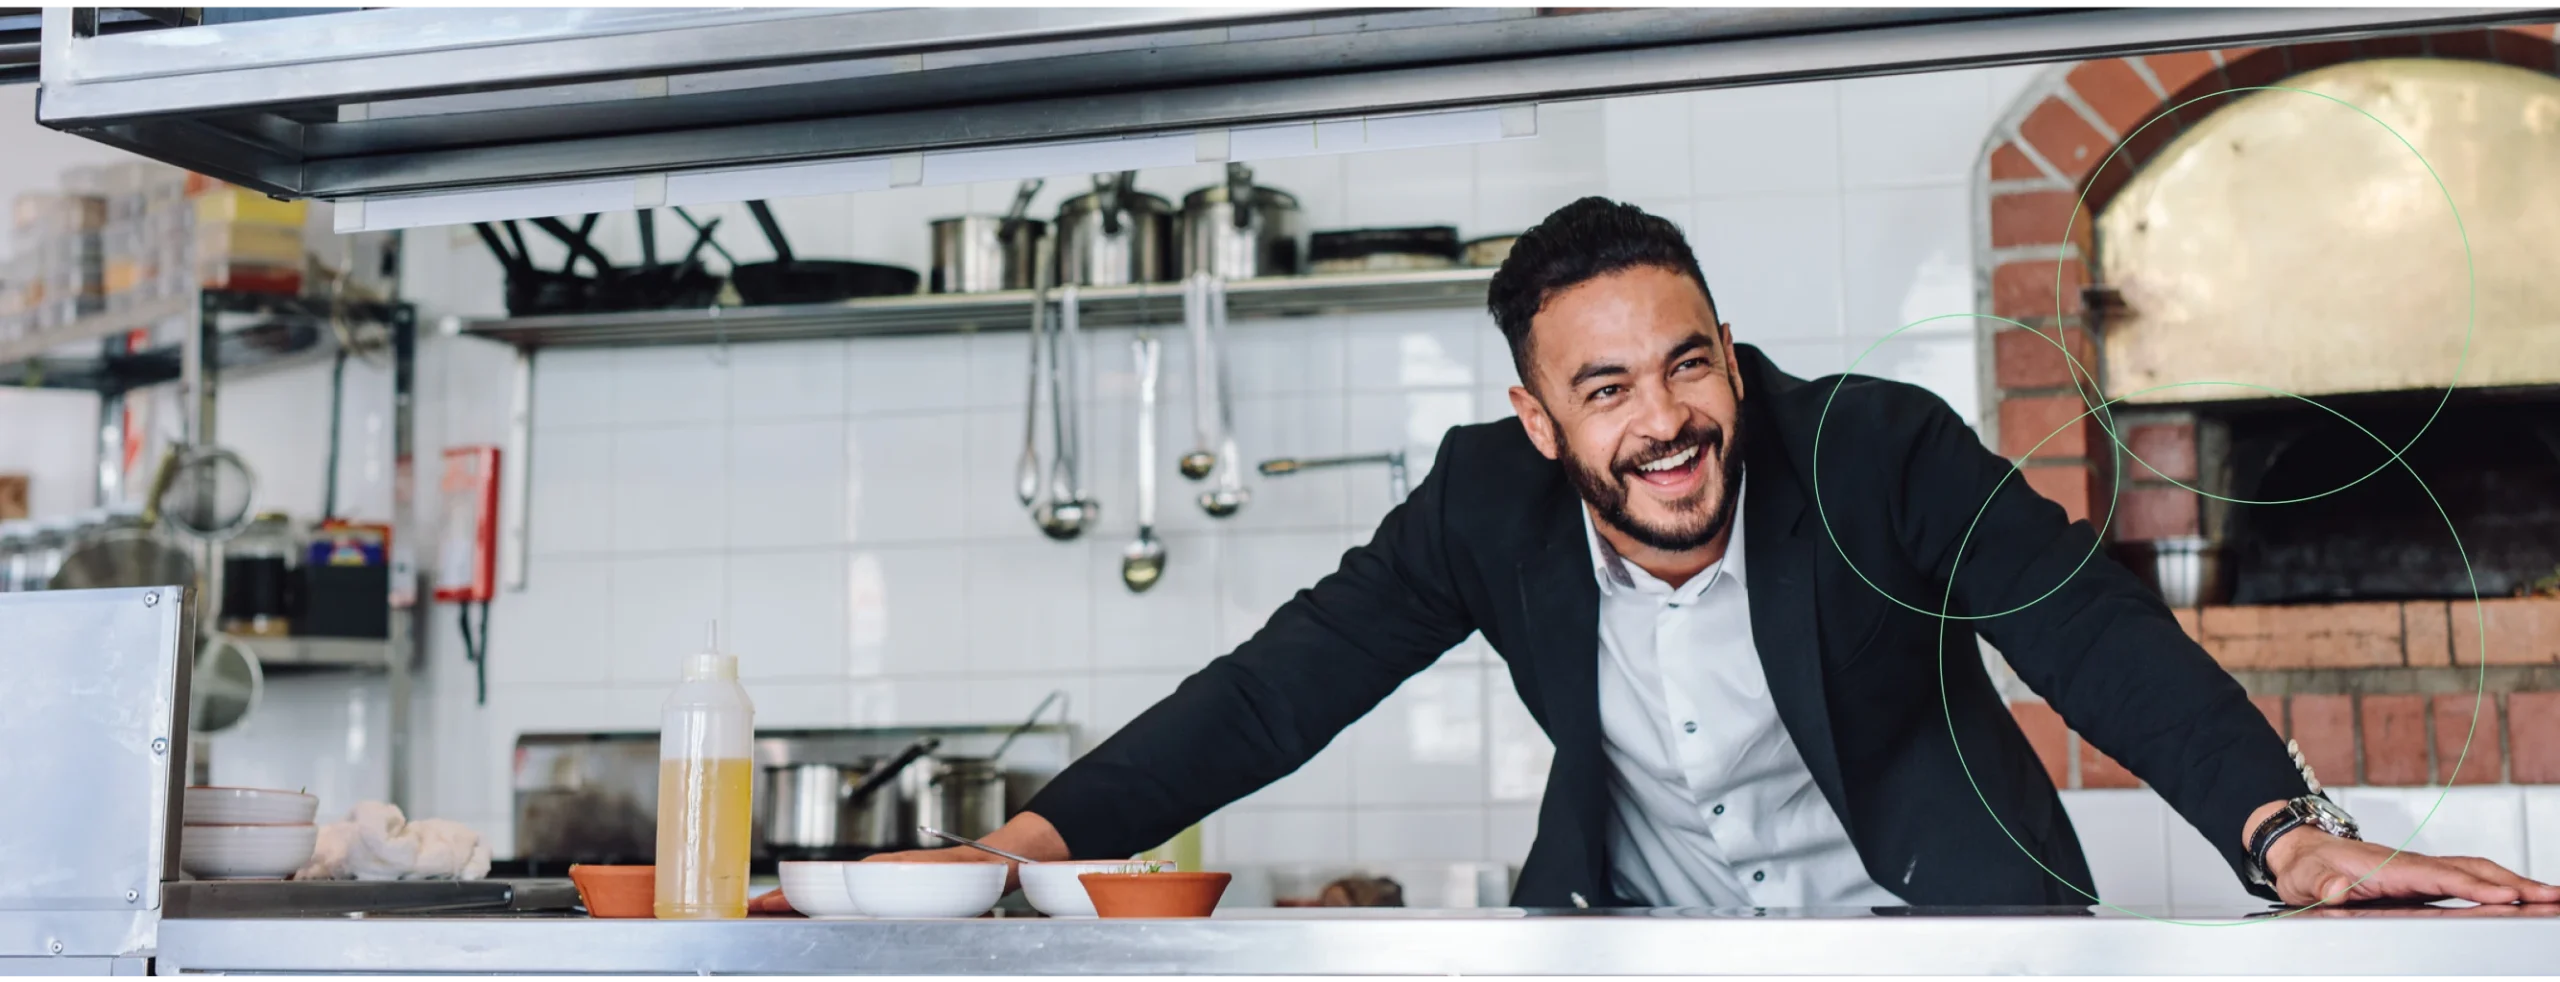 Man behind commercial kitchen counter leaning over smiling.